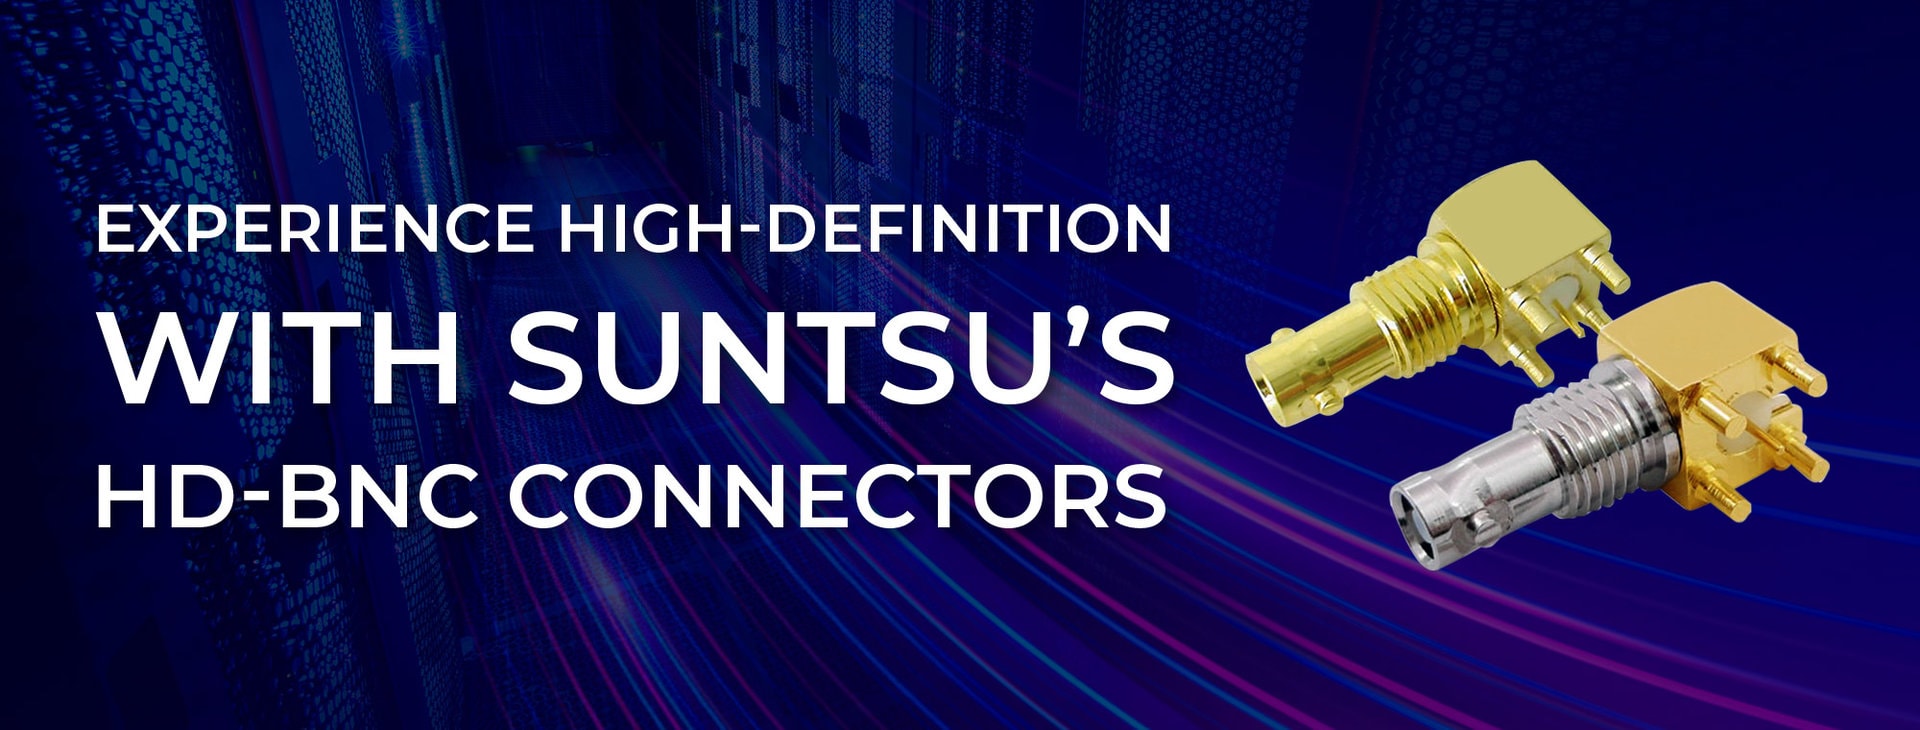 Experience High-Definition with Suntsu’s HD-BNC Connectors